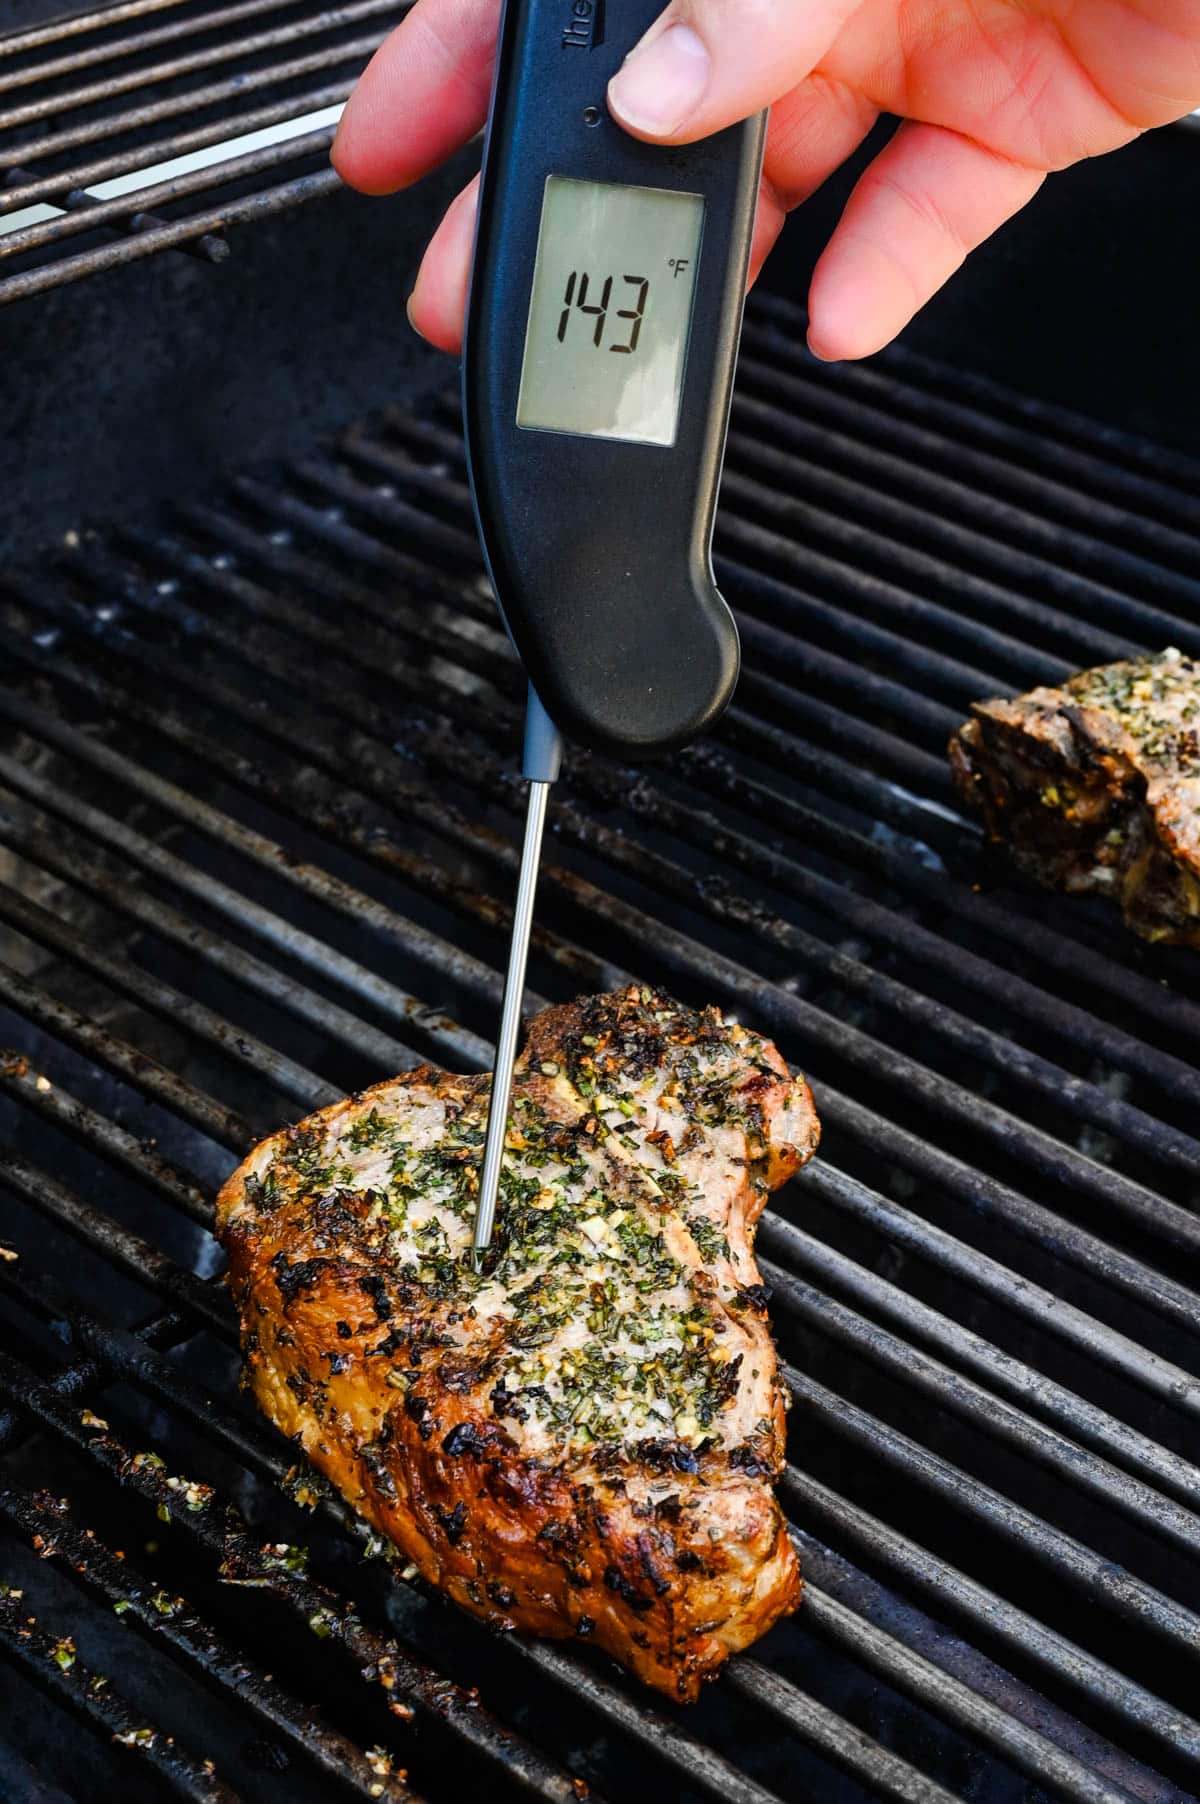 Take the veal chops' temperature as they grill with an Instant read thermometer.